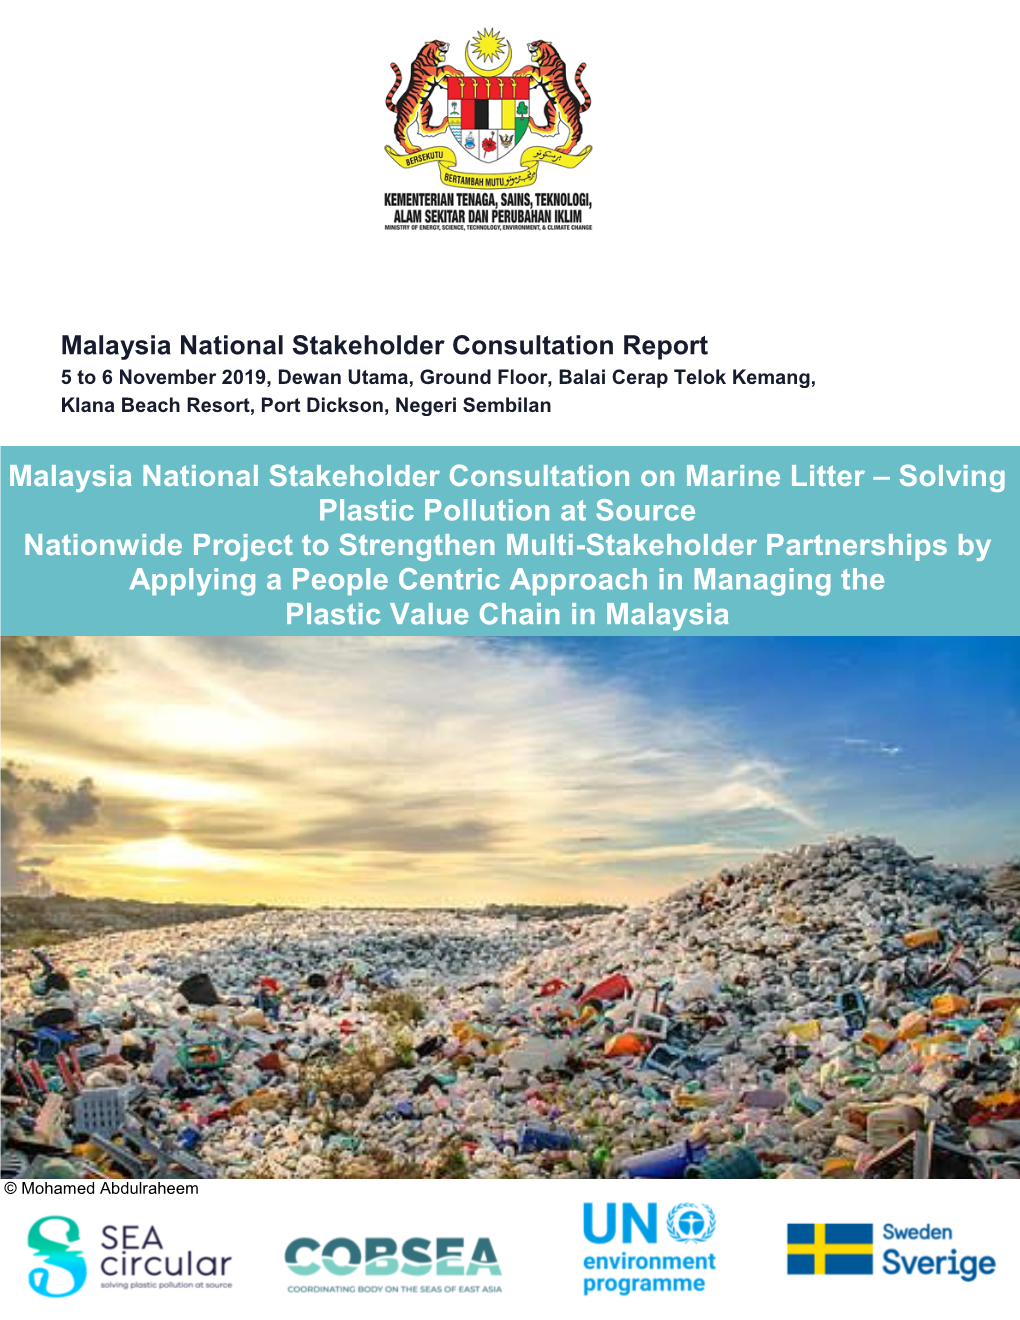 Malaysia National Stakeholder Consultation on Marine Litter – Solving Plastic Pollution at Source